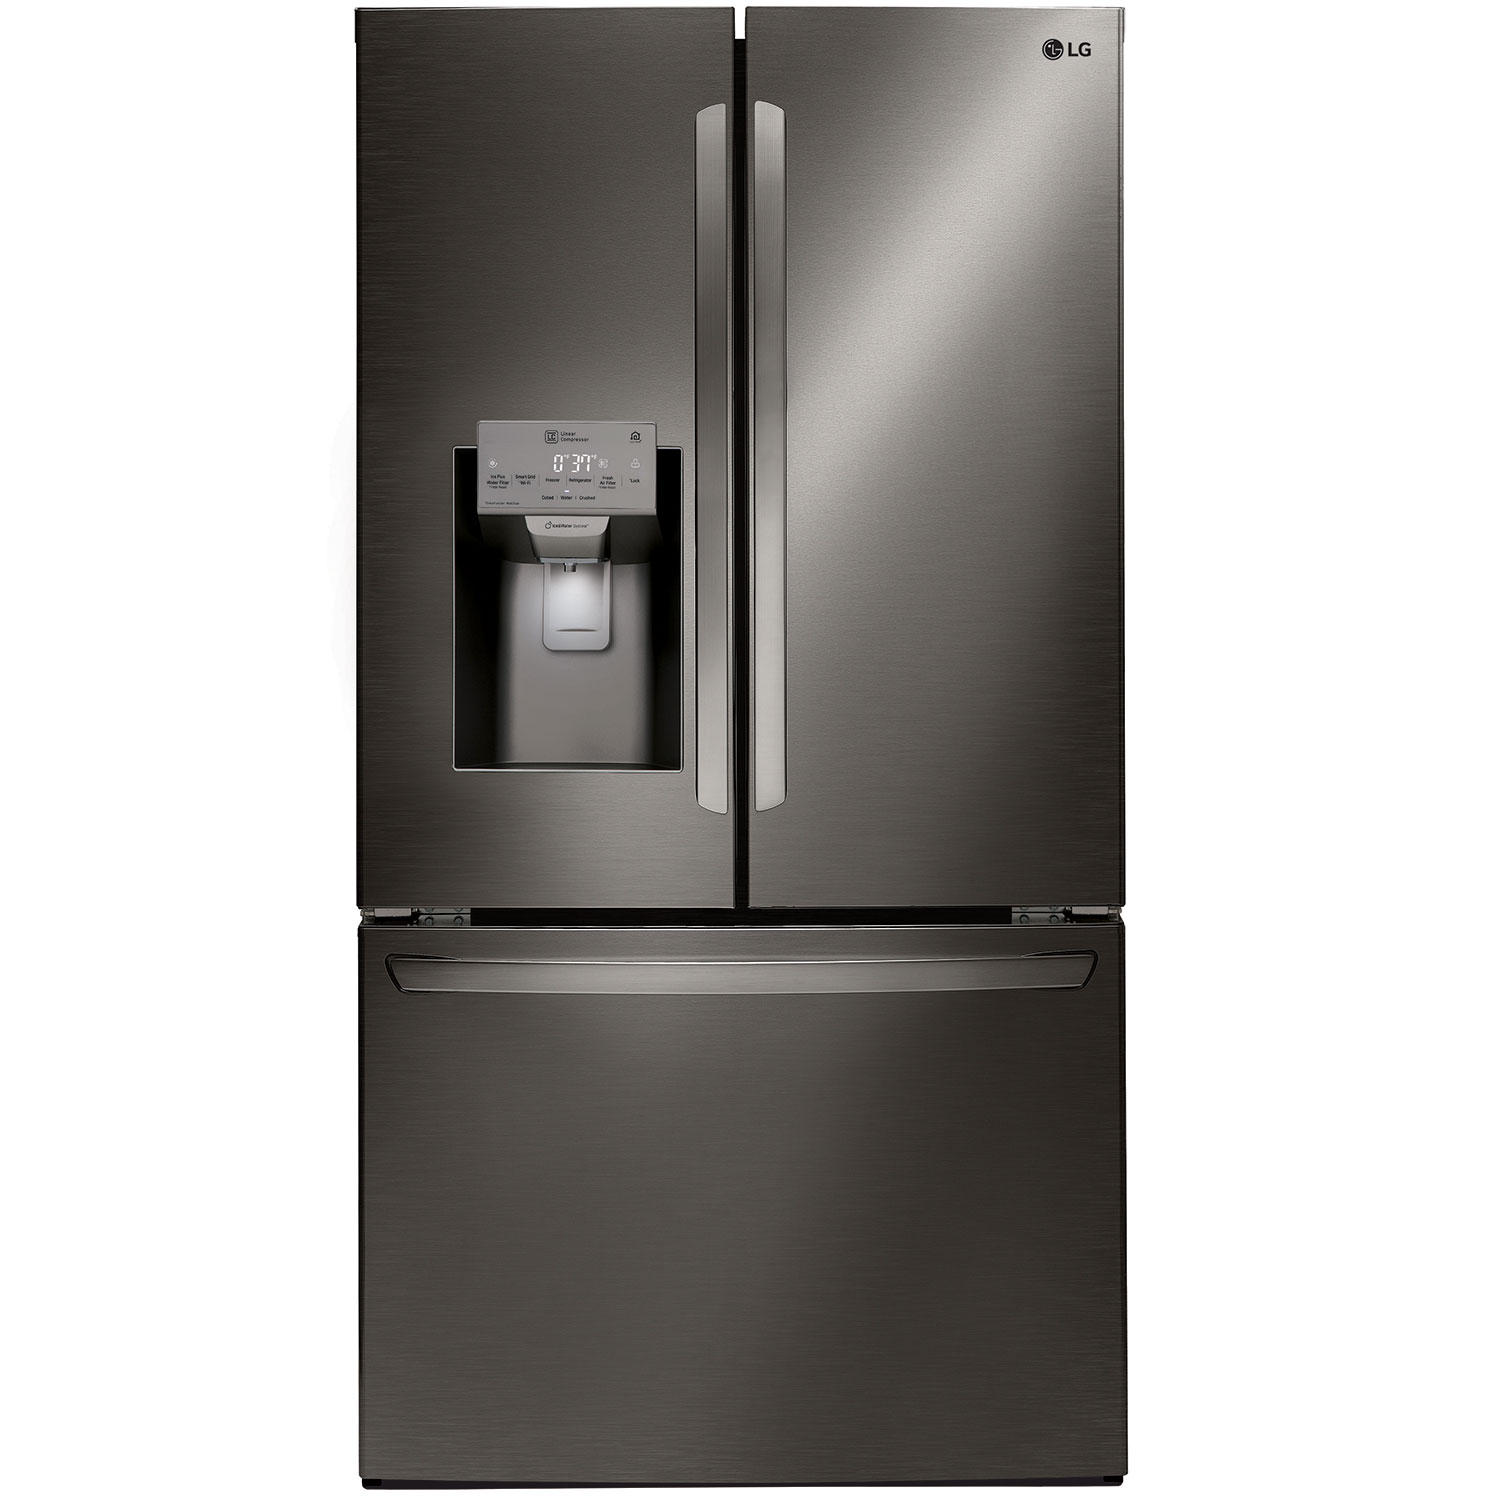 LG LFXS26973S 26 cu ft Capacity Smart Wi-Fi Enabled French Door Refrigerator